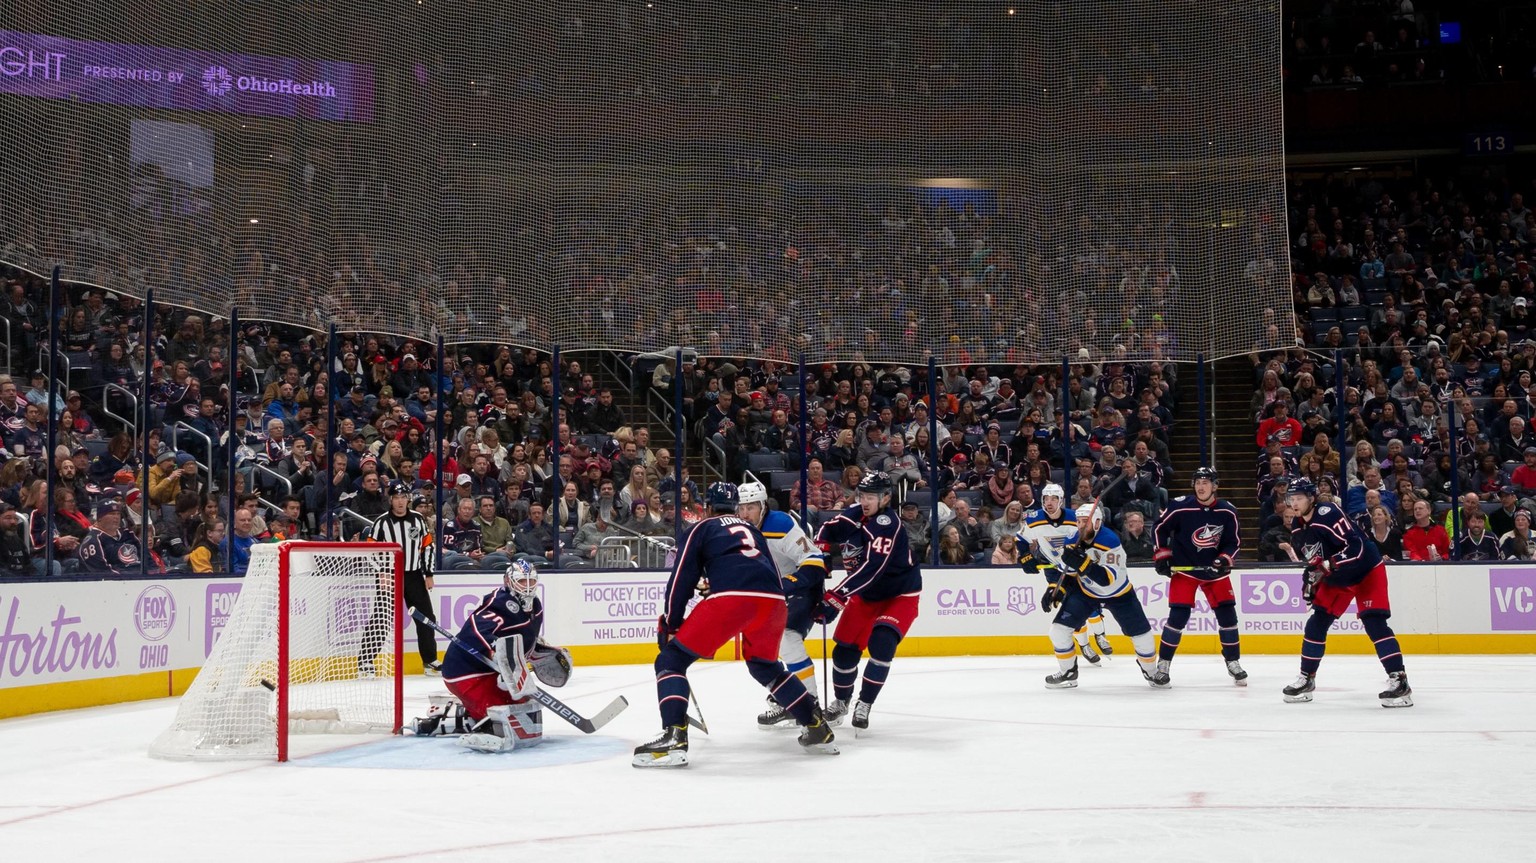 IMAGO / ZUMA Wire

November 15, 2019: Joonas Korpisalo (70) of the Columbus Blue Jackets deflects a shot as a Hockey Fights Cancer Night sign is seen during game action between the Saint Louis Blues a ...